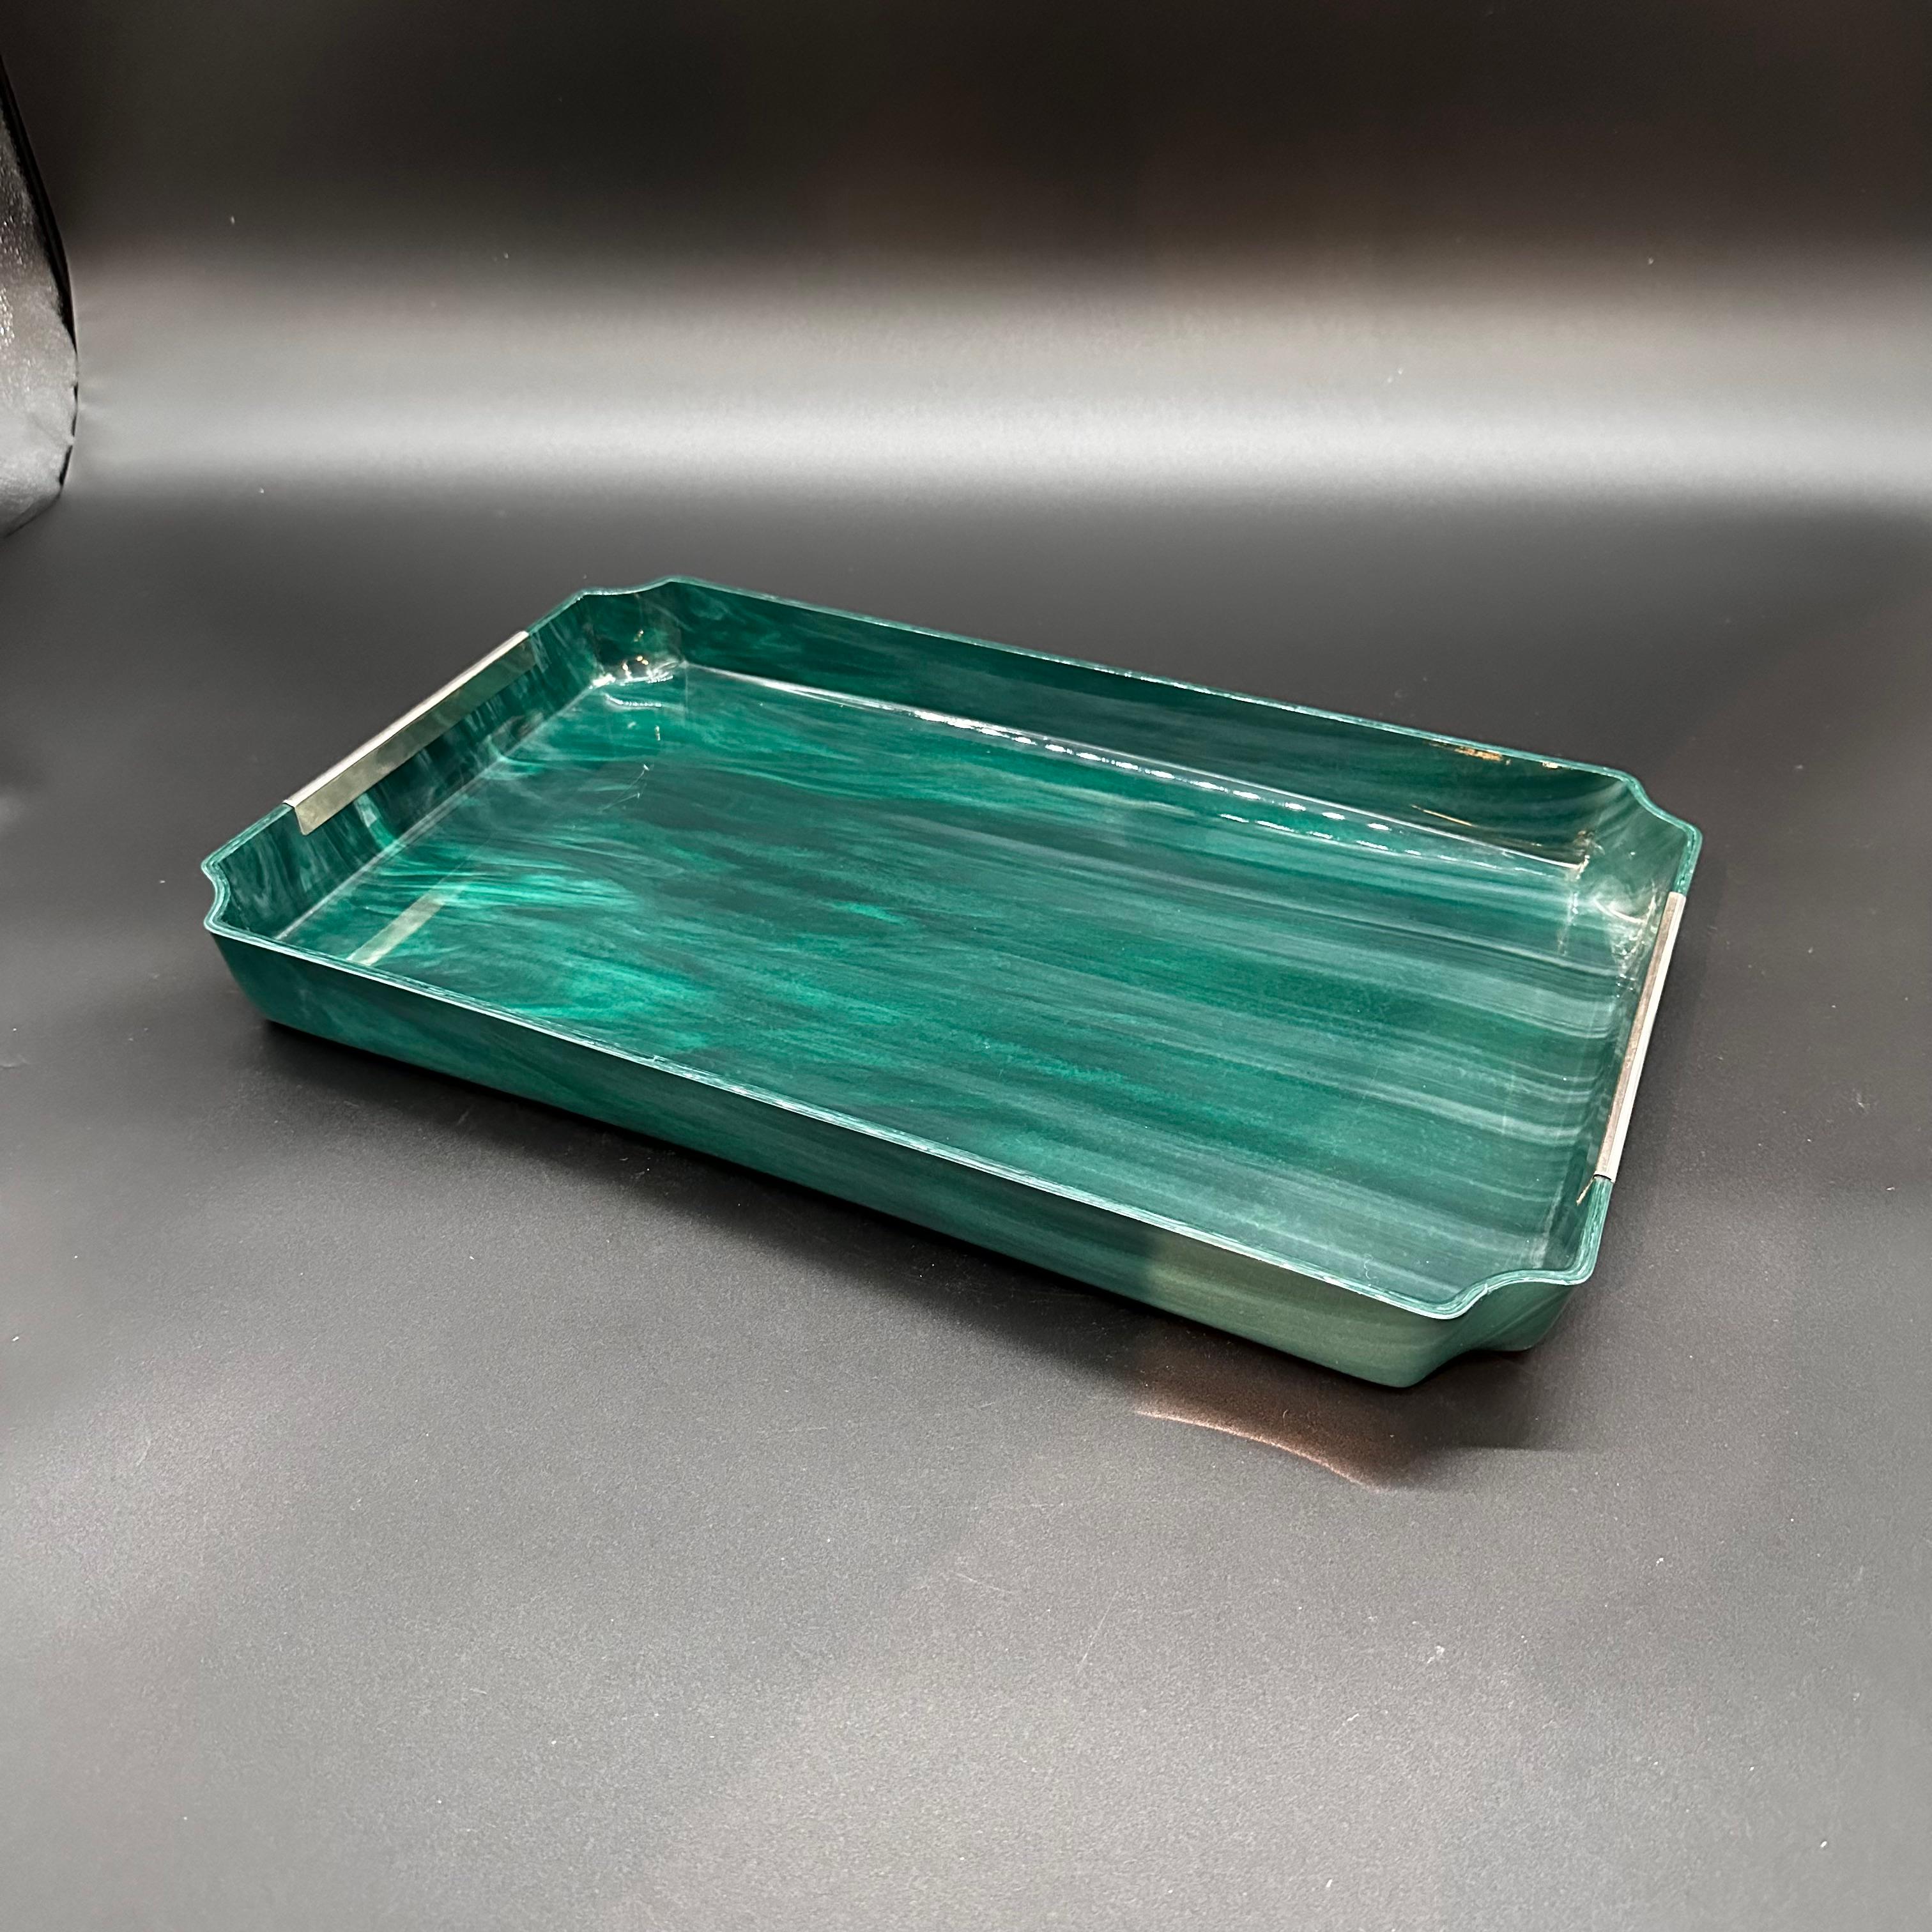 The Vintage Italian Rectangular Blue Tray from the 1980s is a stylish and elegant piece characterized by its sleek design and vibrant blue color. Crafted in Italy during the 1980s, this tray typically features clean lines and a glossy finish, making